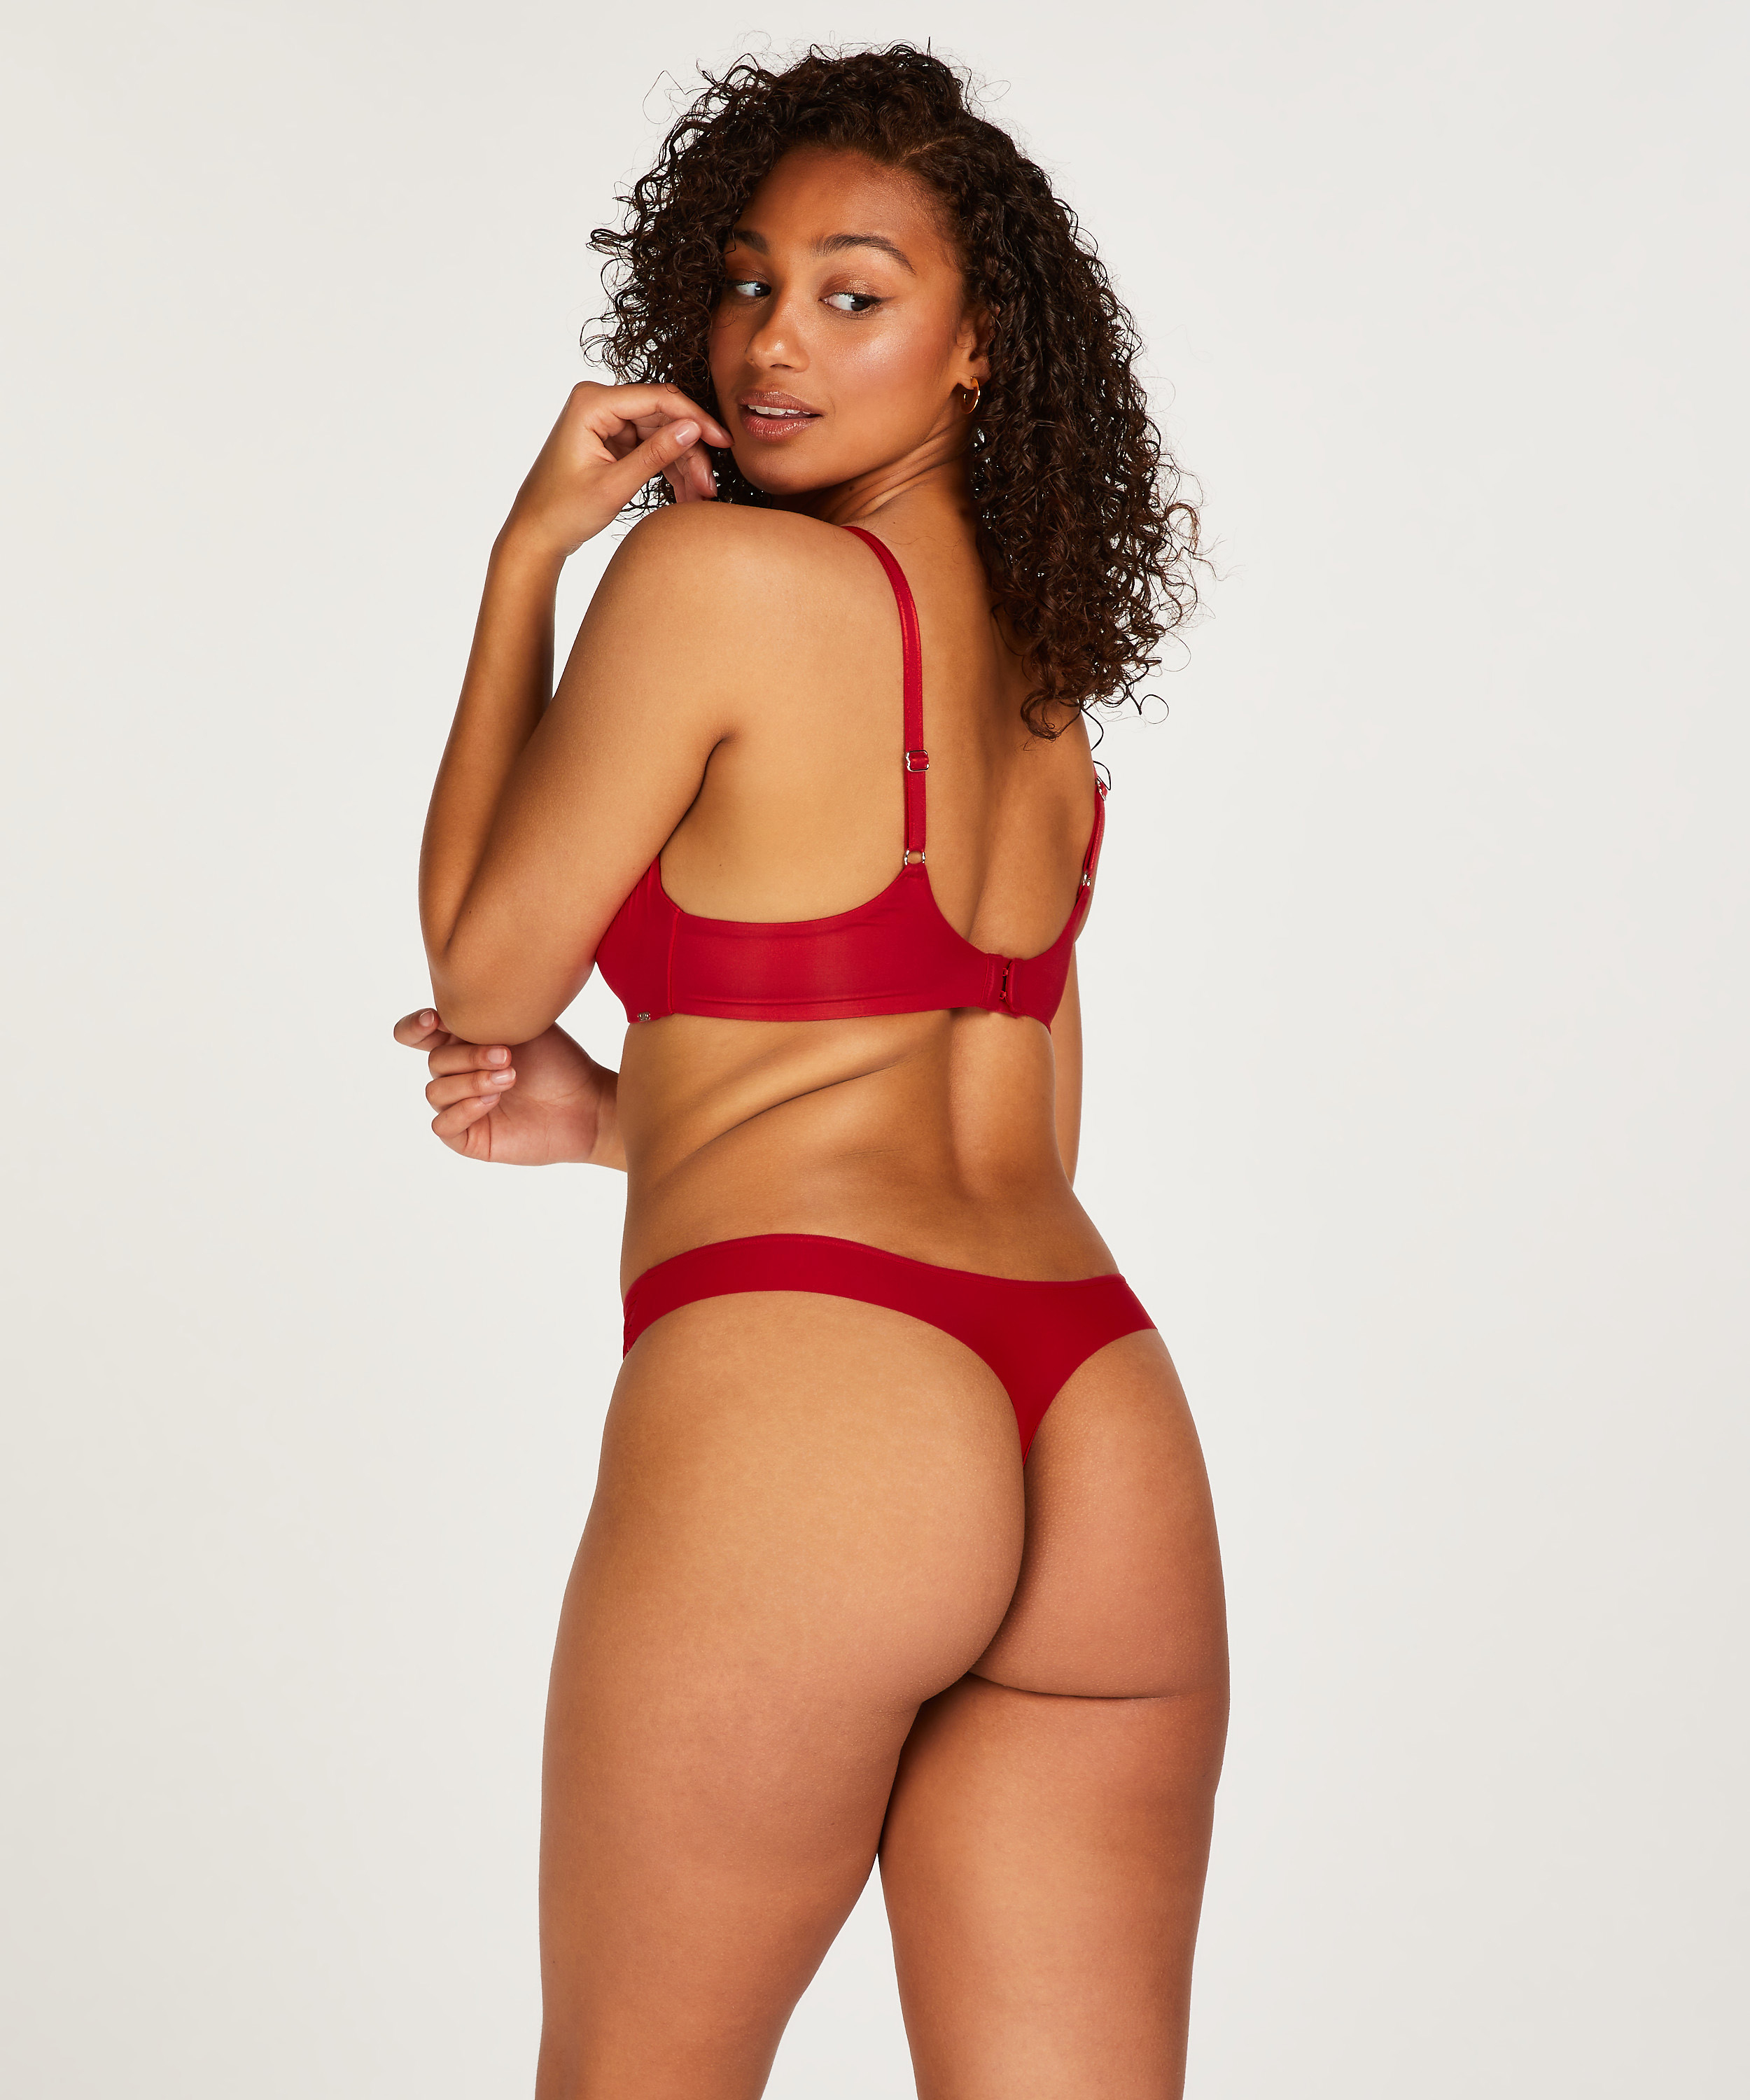 Invisible string Stripe mesh, Rouge, main